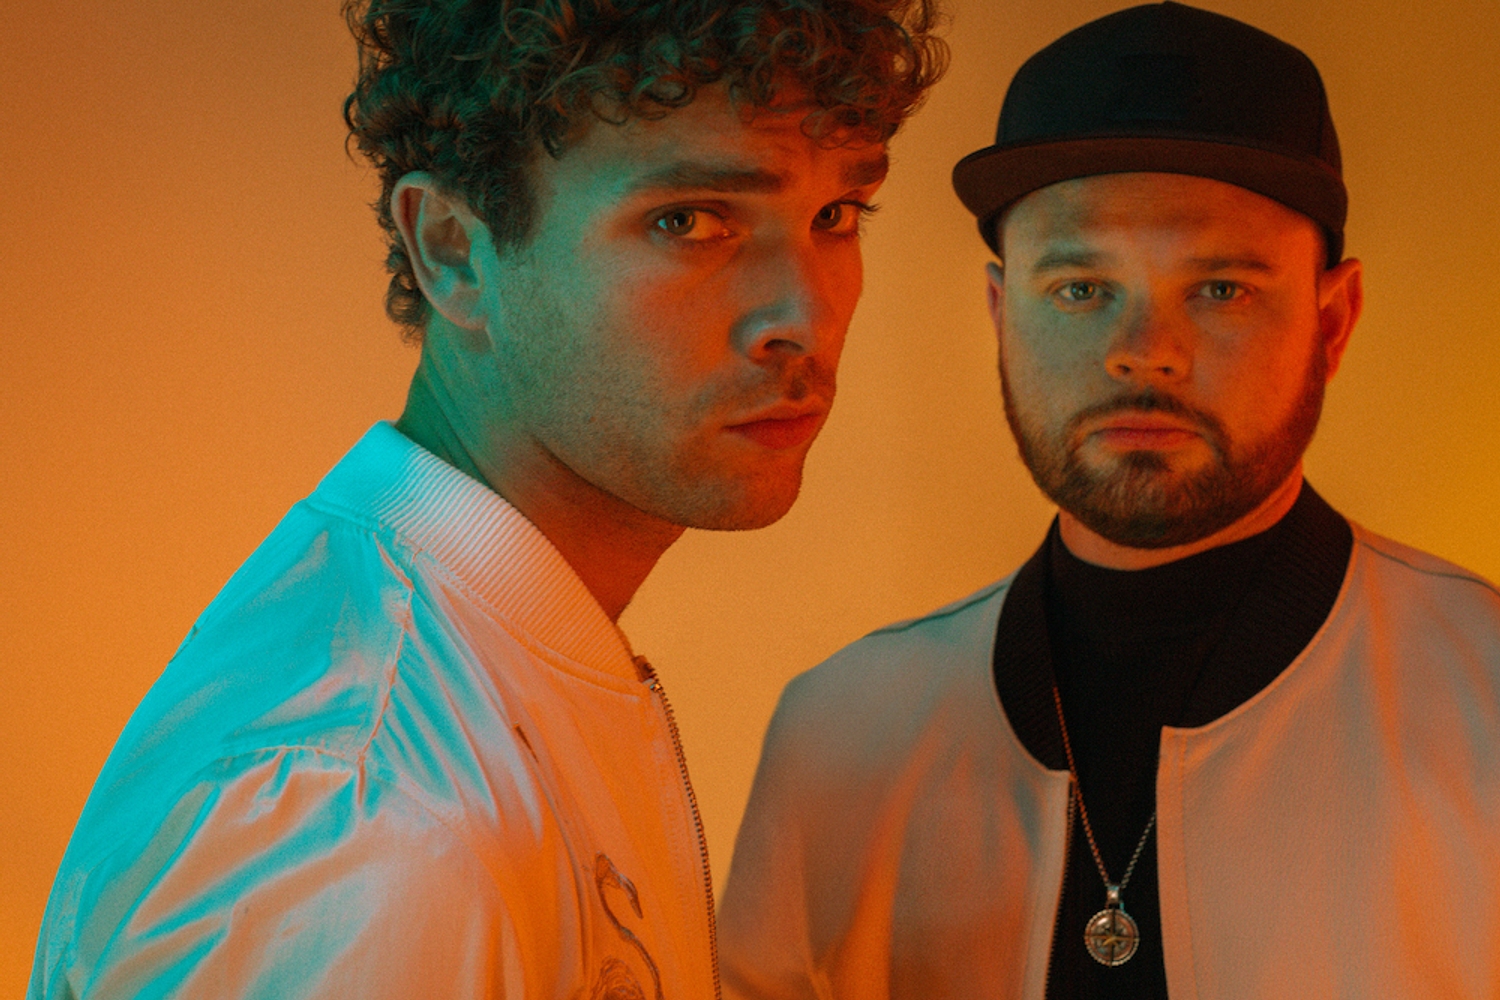 Royal Blood unleash new track ‘Trouble’s Coming’